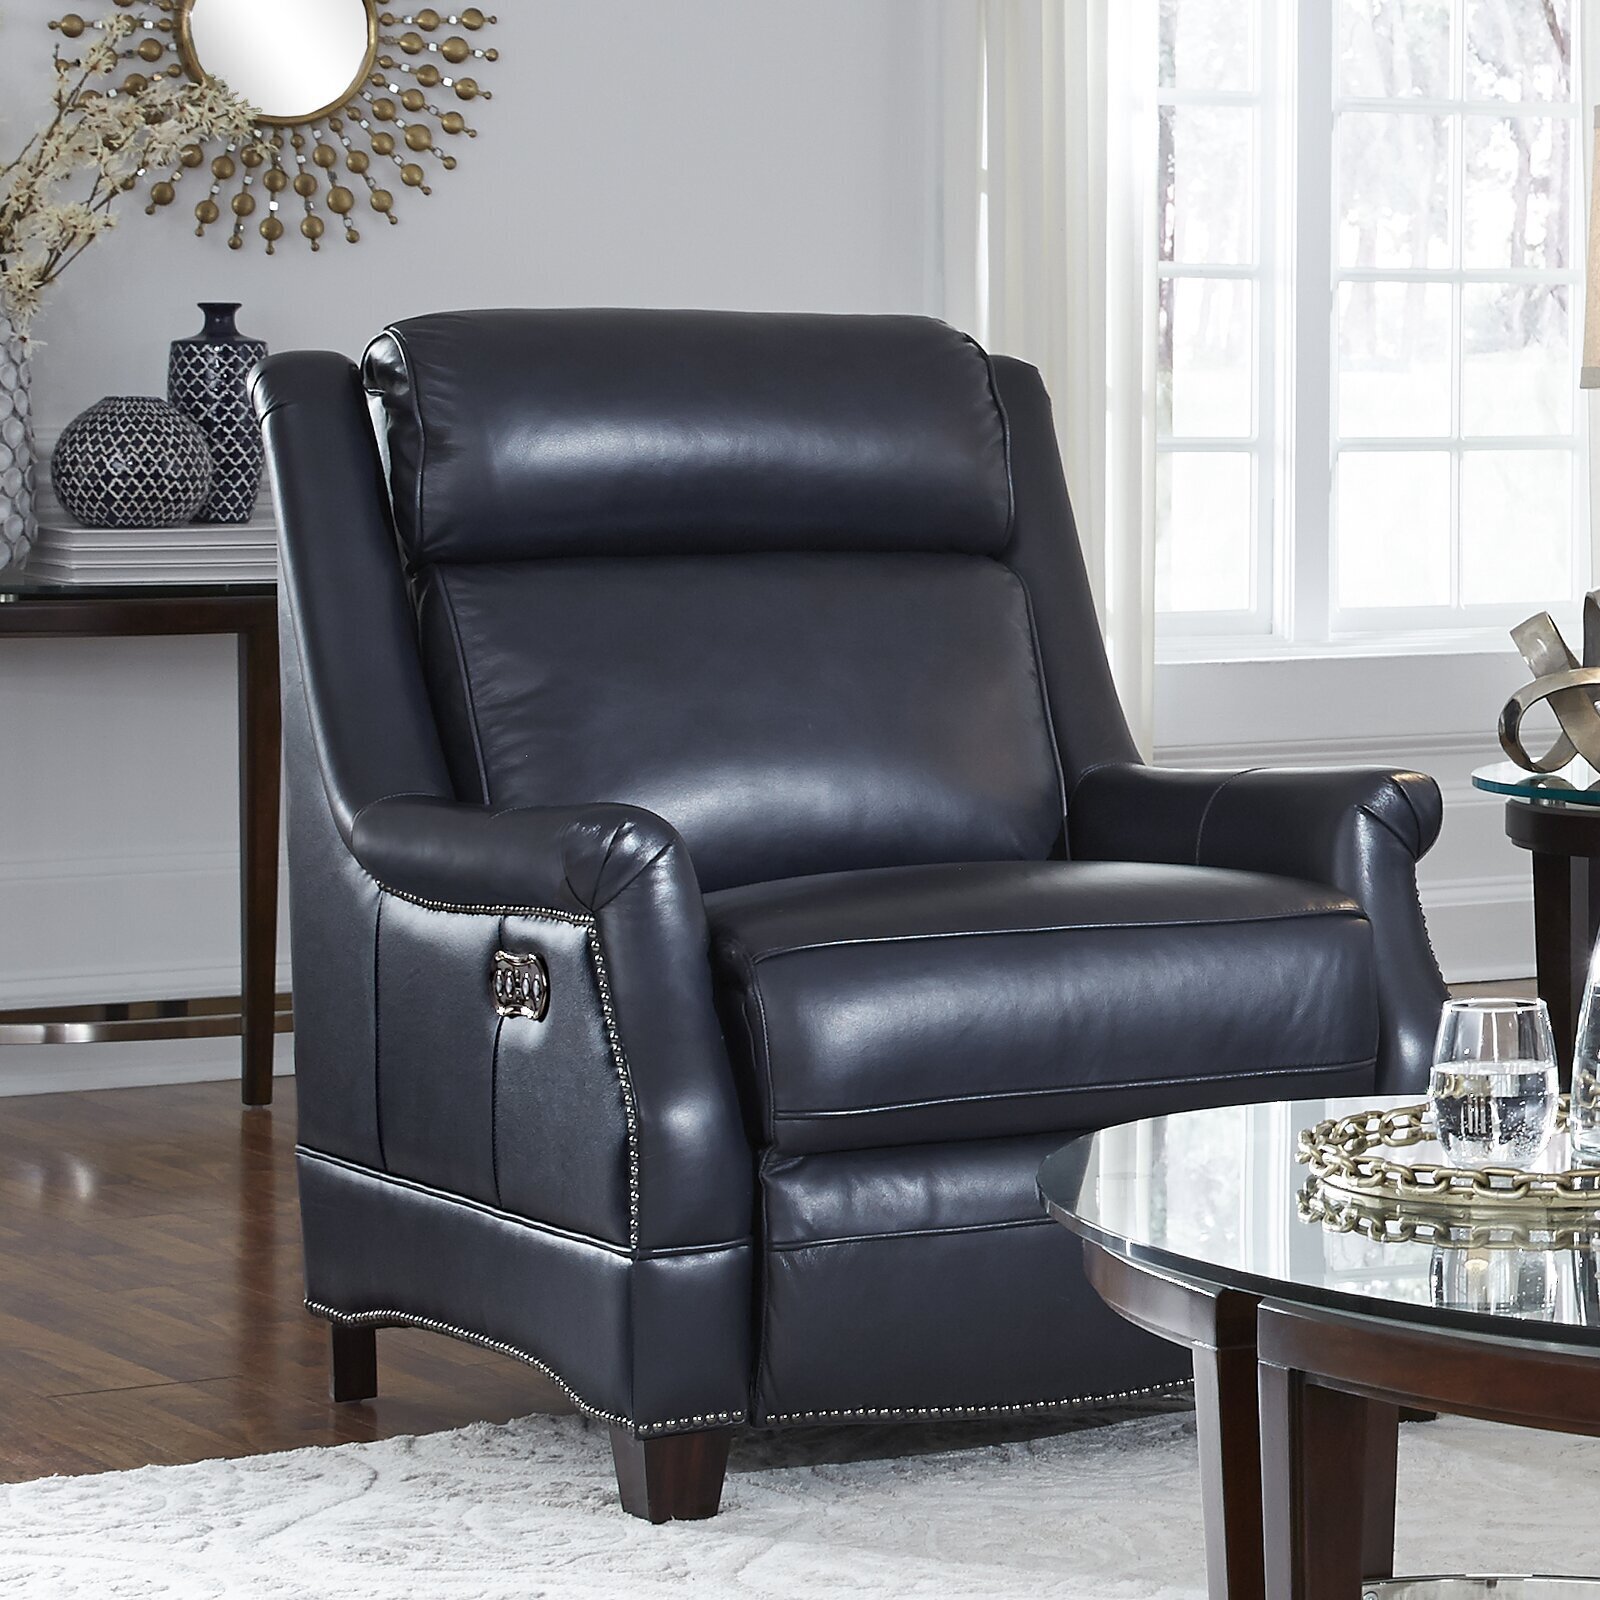 Dreamy Genuine Leather Recliner That Reclines With The Push of a Button 